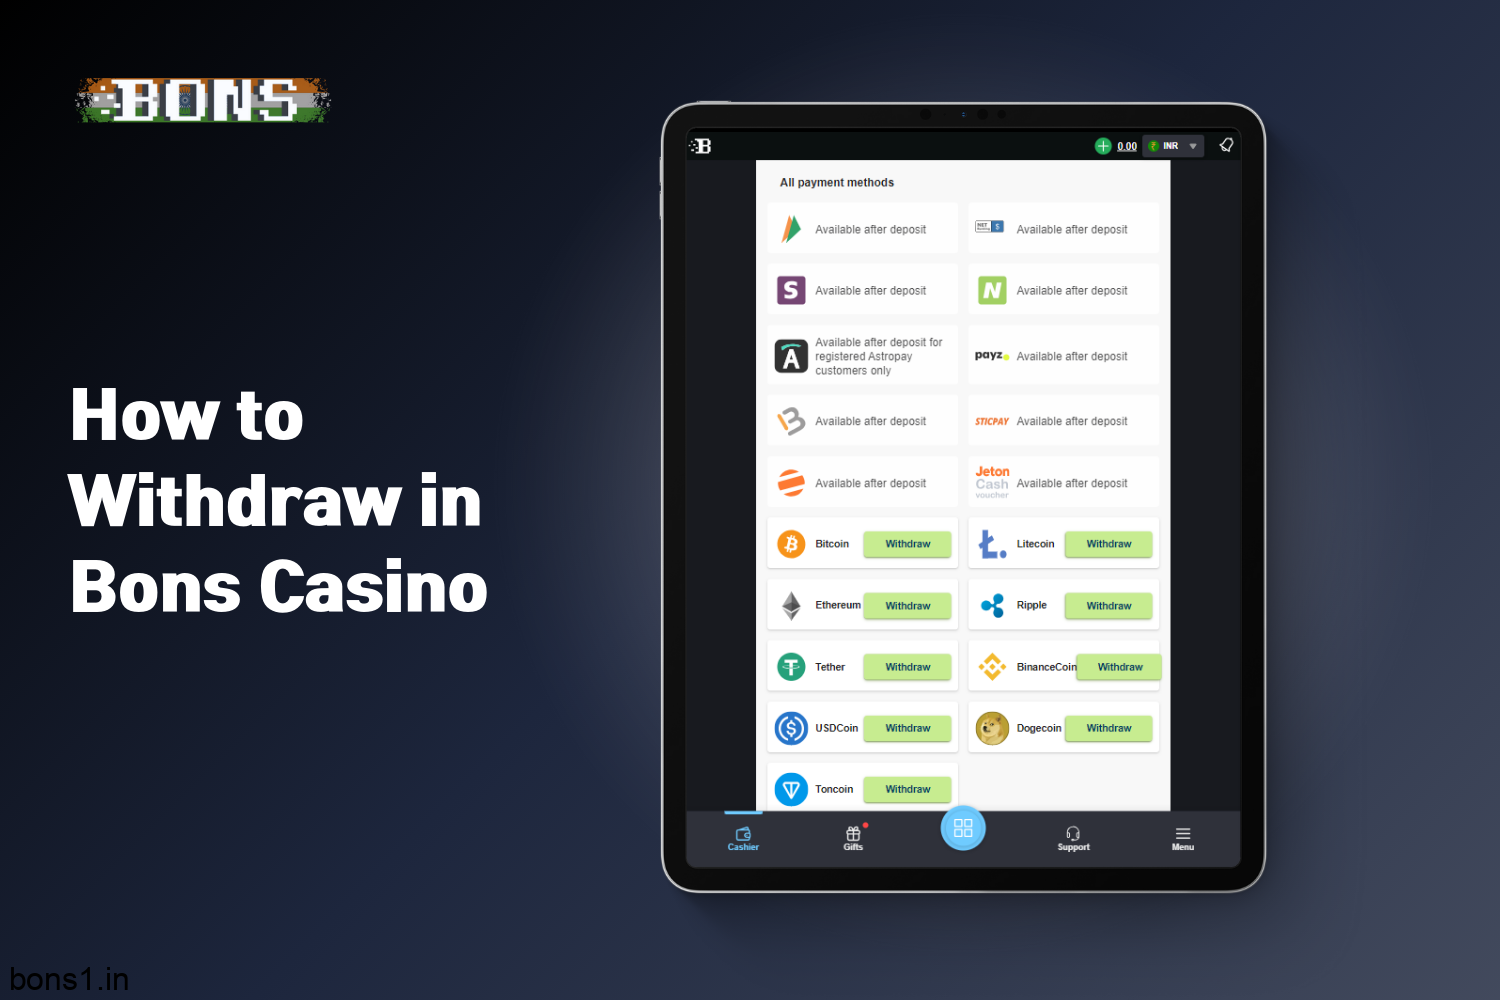 To withdraw winnings from bons casino, users from India need to go to the appropriate section in their personal account